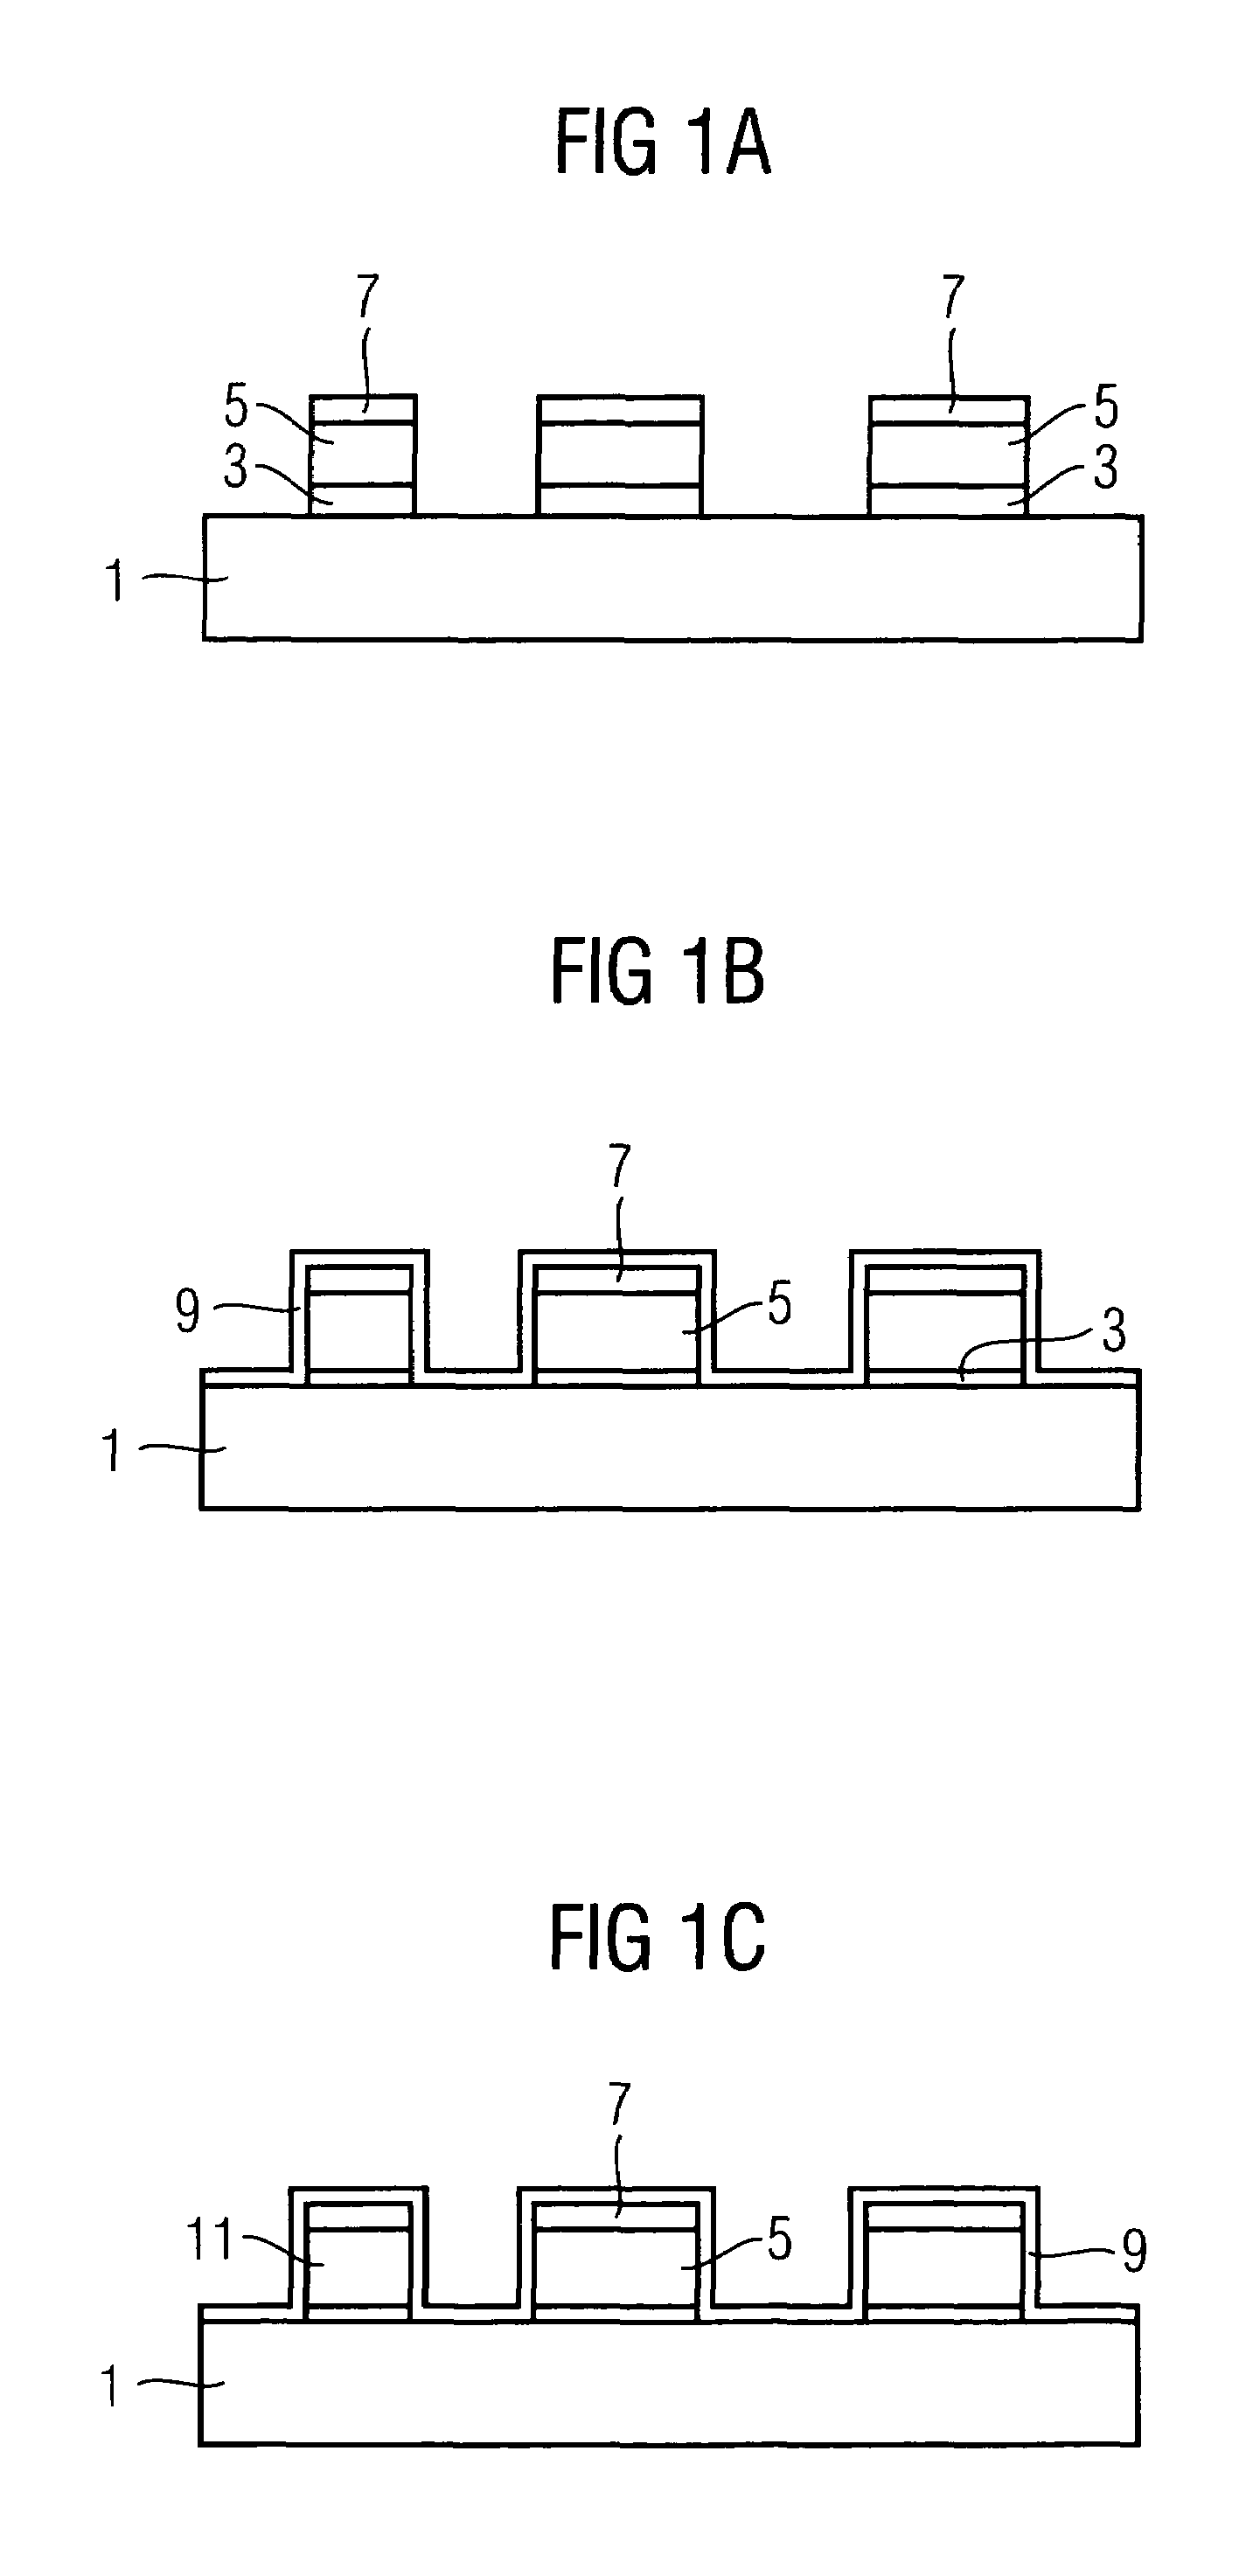 Process for fabrication of a ferrocapacitor